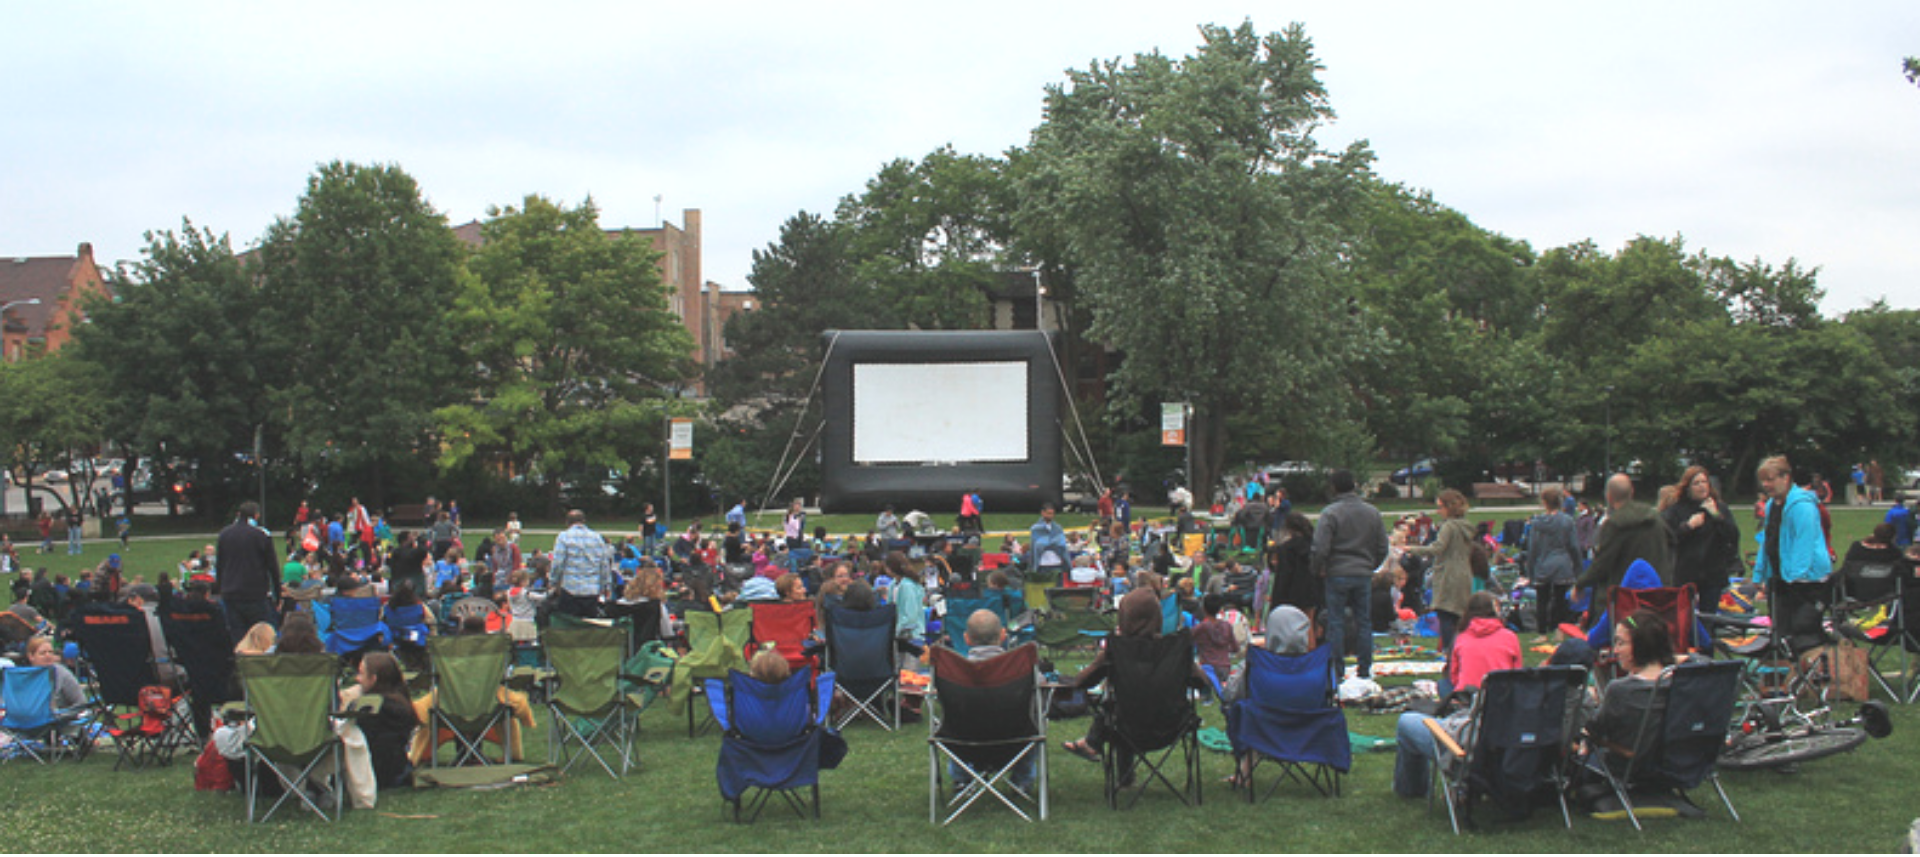 Movies in the Park: The Little Mermaid